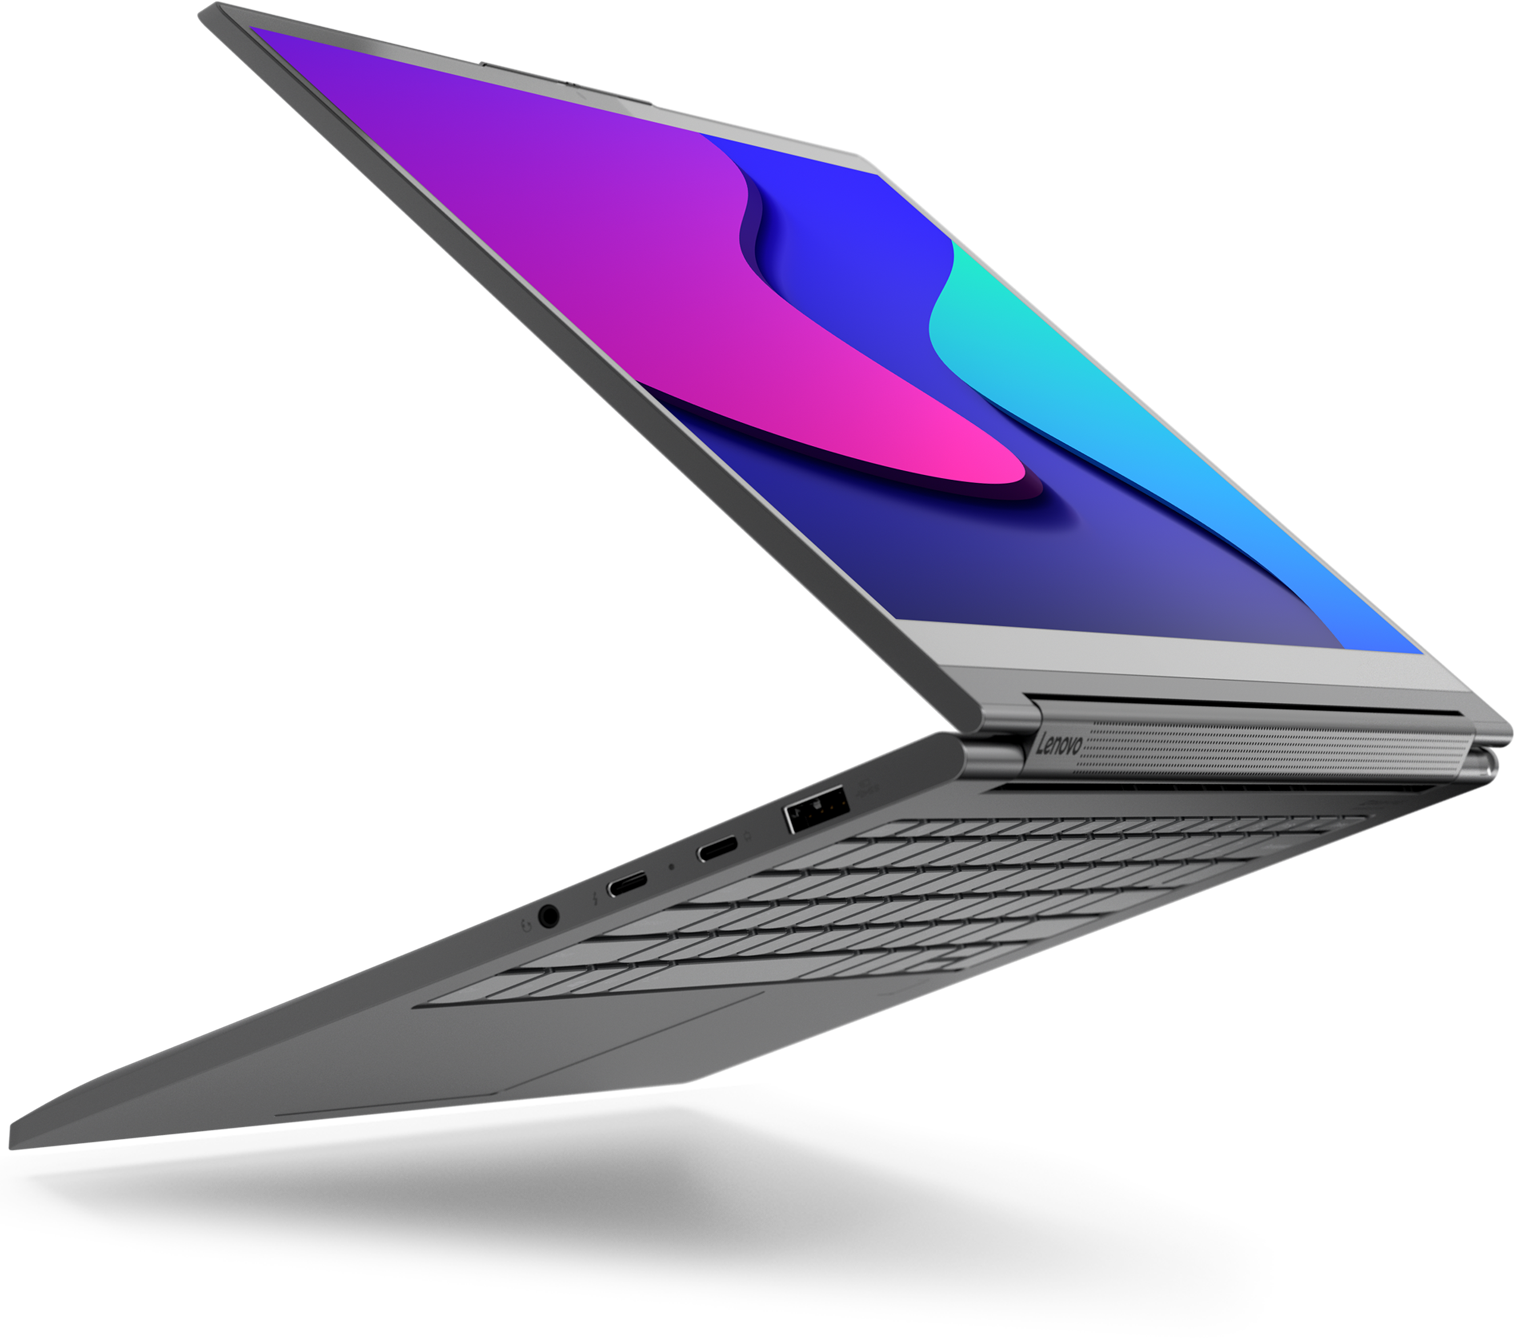 Yoga C940 Open Fold Side View